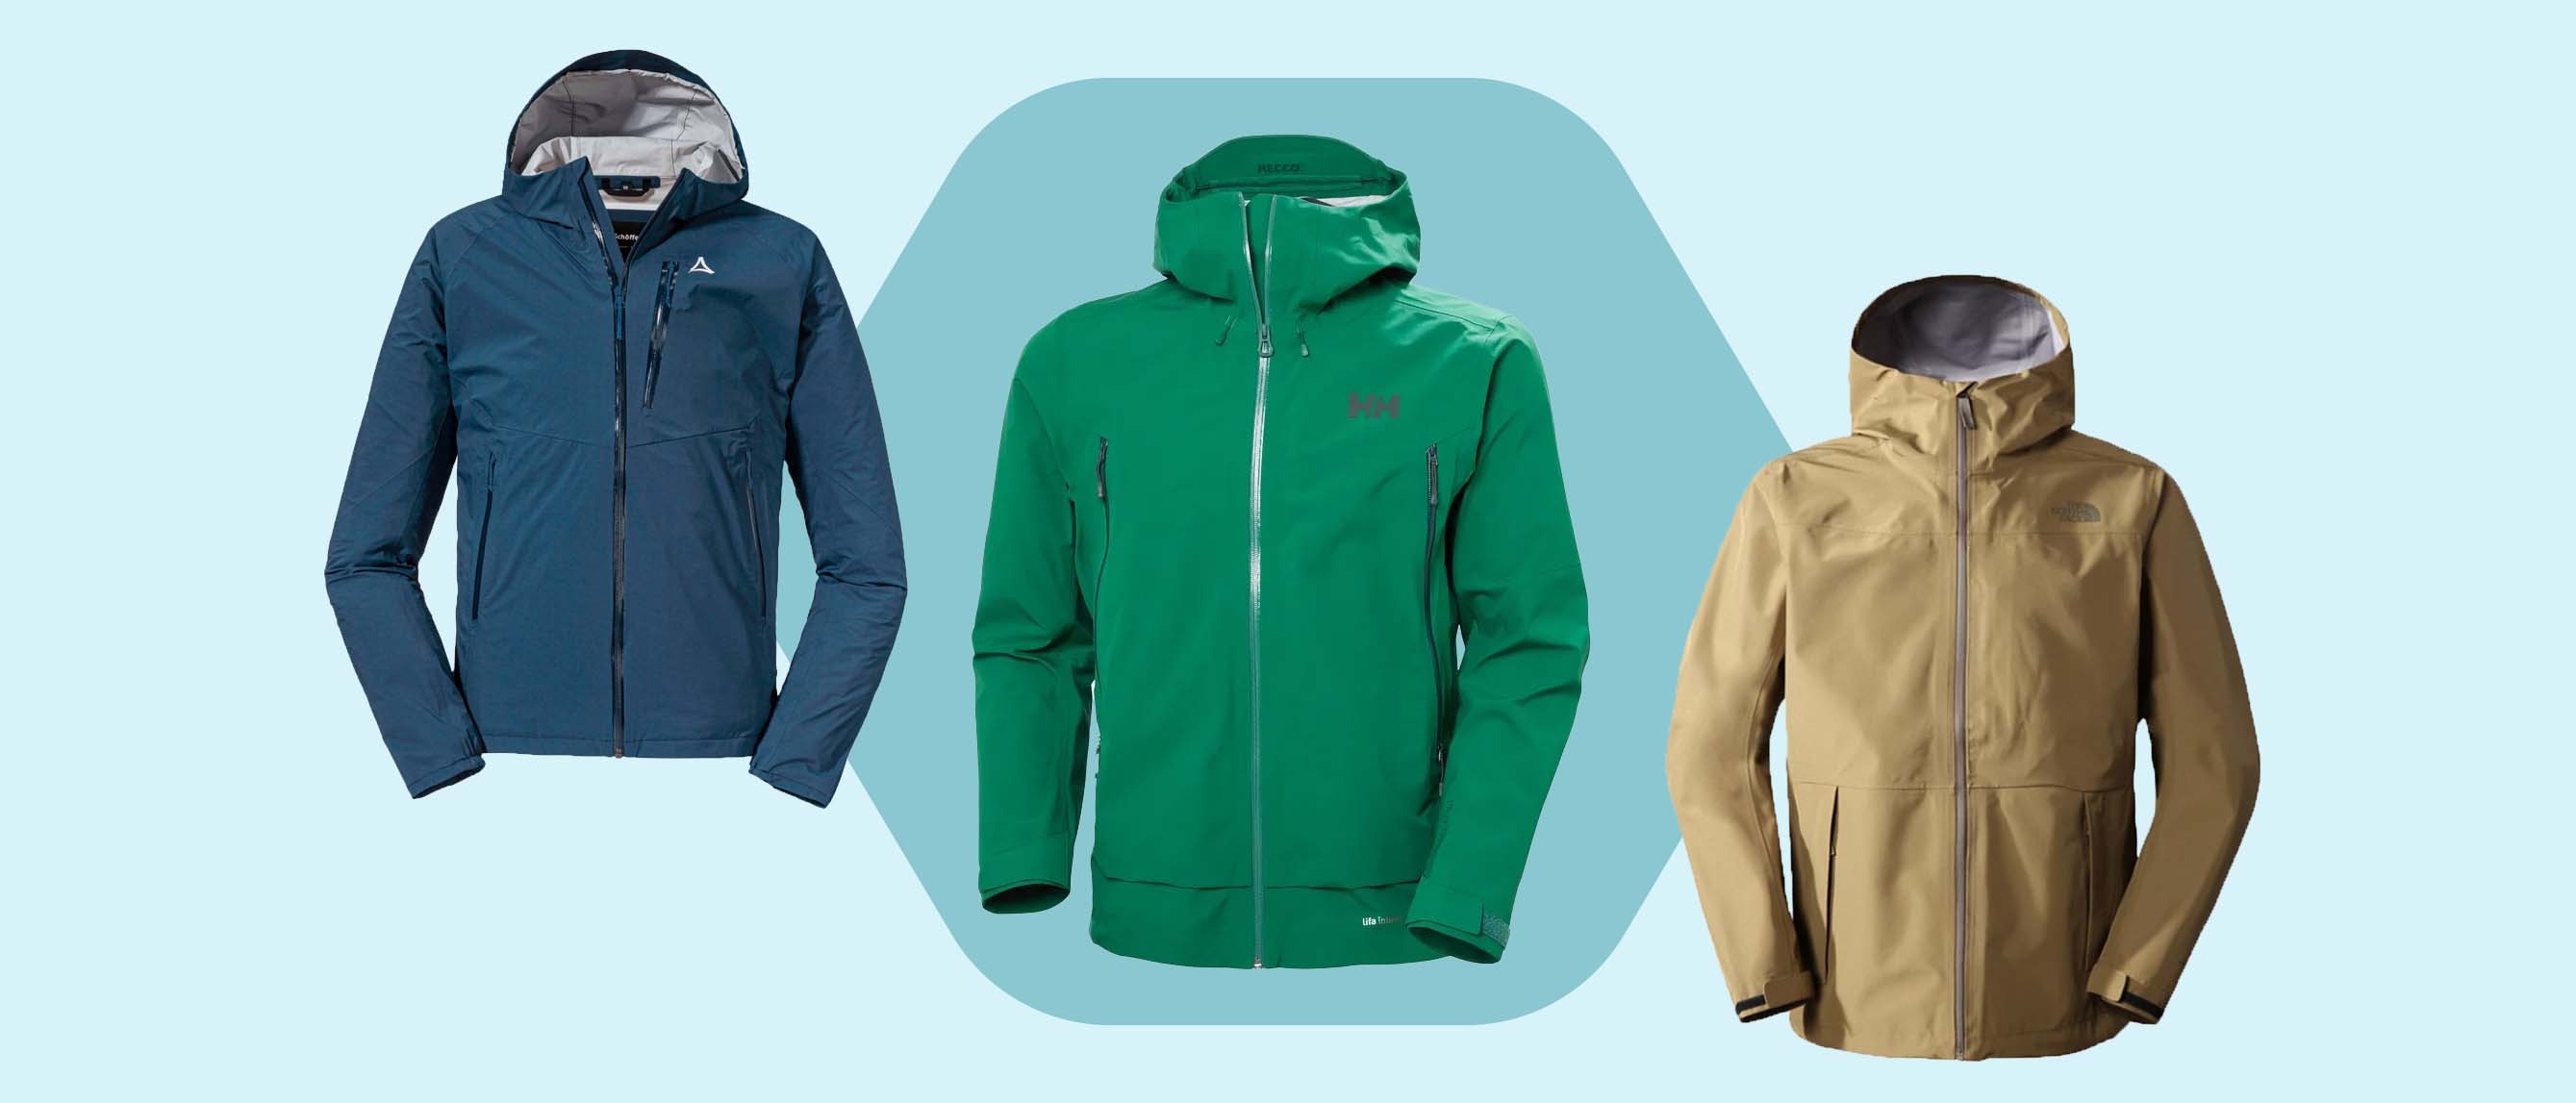 Going on an adventure? Check the best waterproof jackets for men